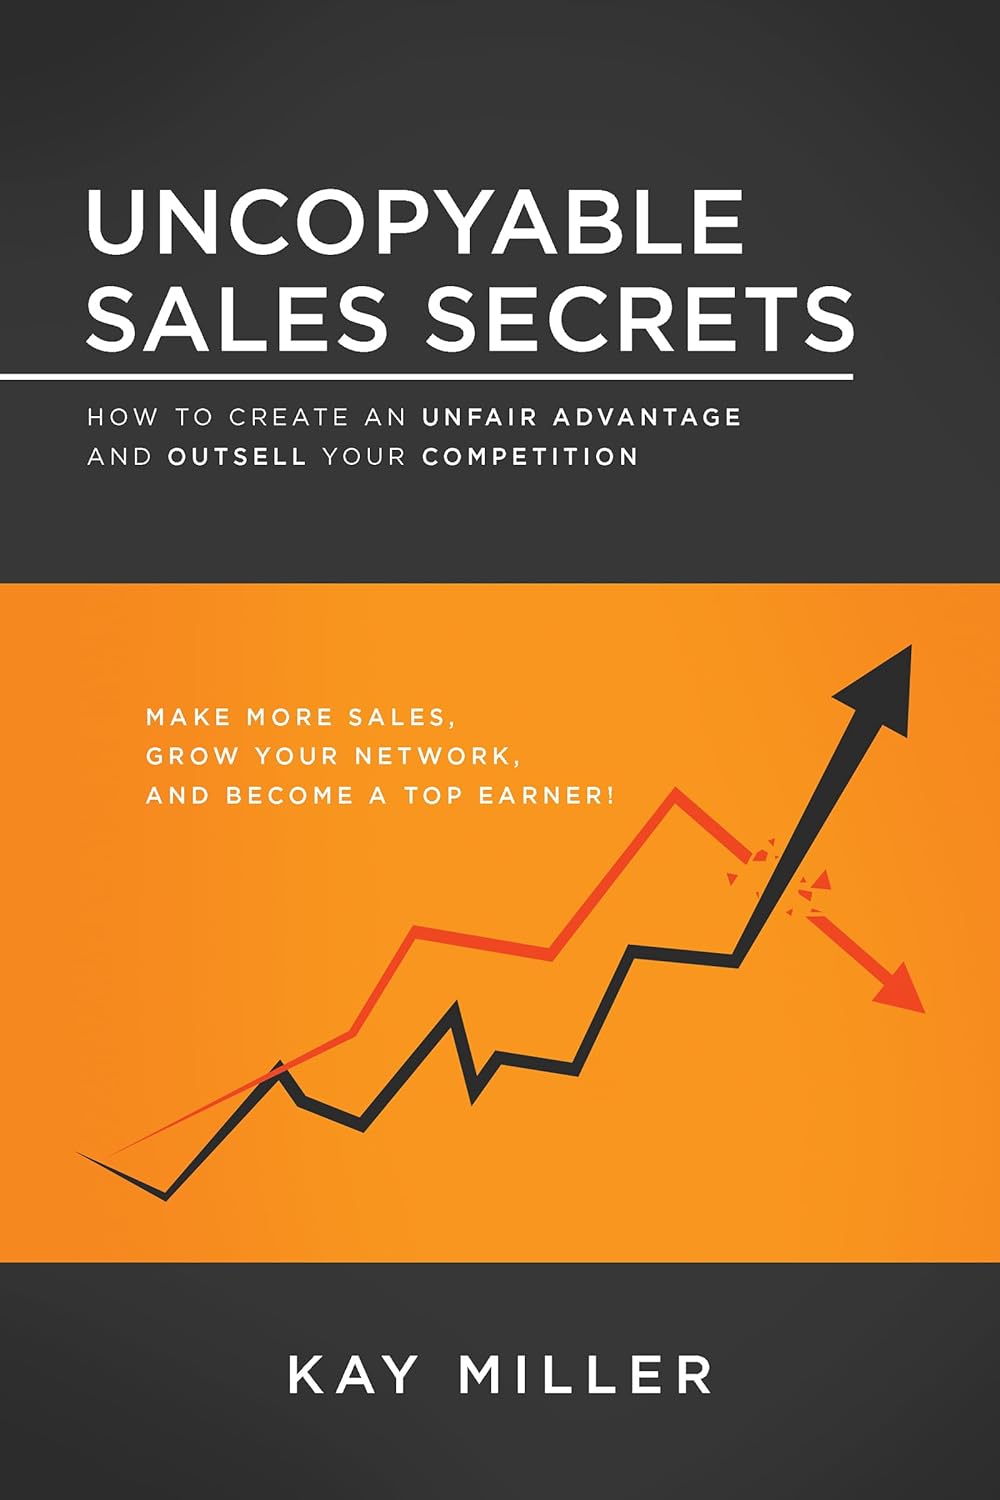 Kay Miller - Uncopyable Sales Secrets. How to Create an Unfair Advantage and Outsell Your Competition